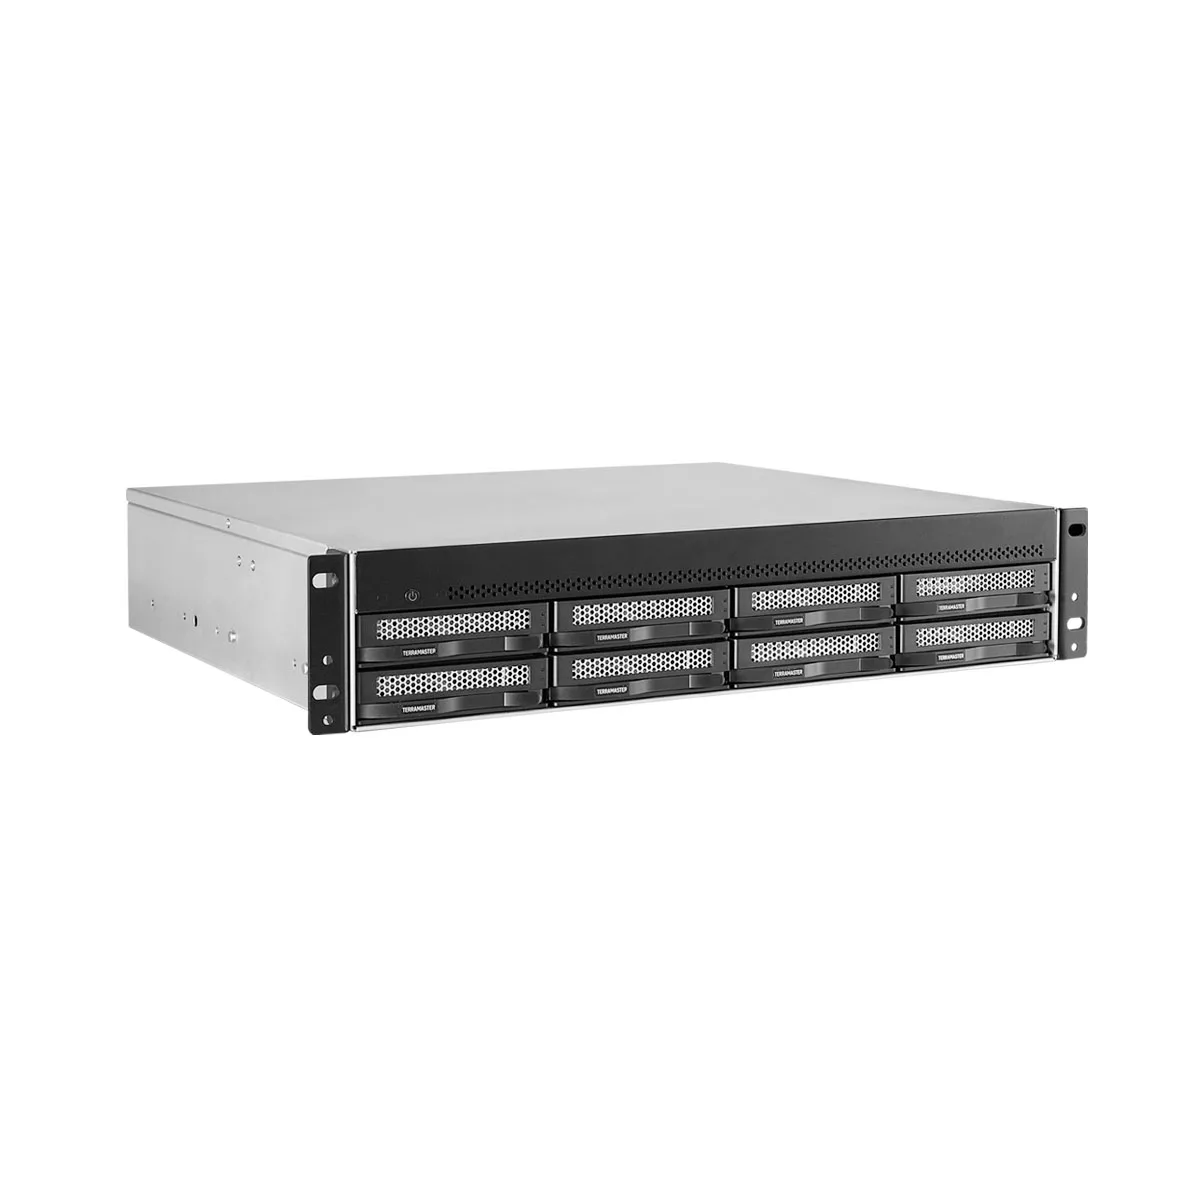 TERRAMASTER U8-450 NAS Server –High Speed Network Attached Storage with Atom C3558R Quad-core, 8GB Memory, SFP+ 10GbE(Diskless)